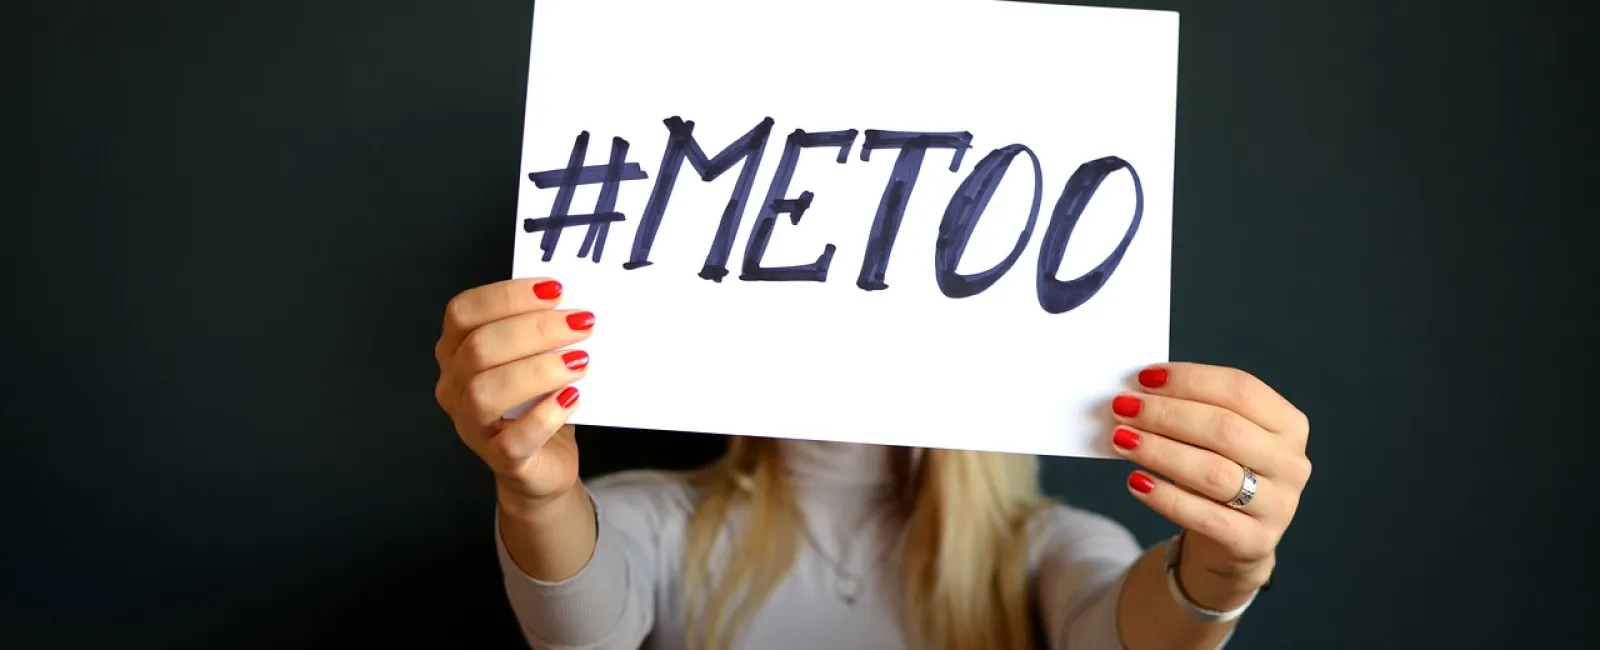 Recent Allegations and Attention on Sexual Harassment Presents Challenges